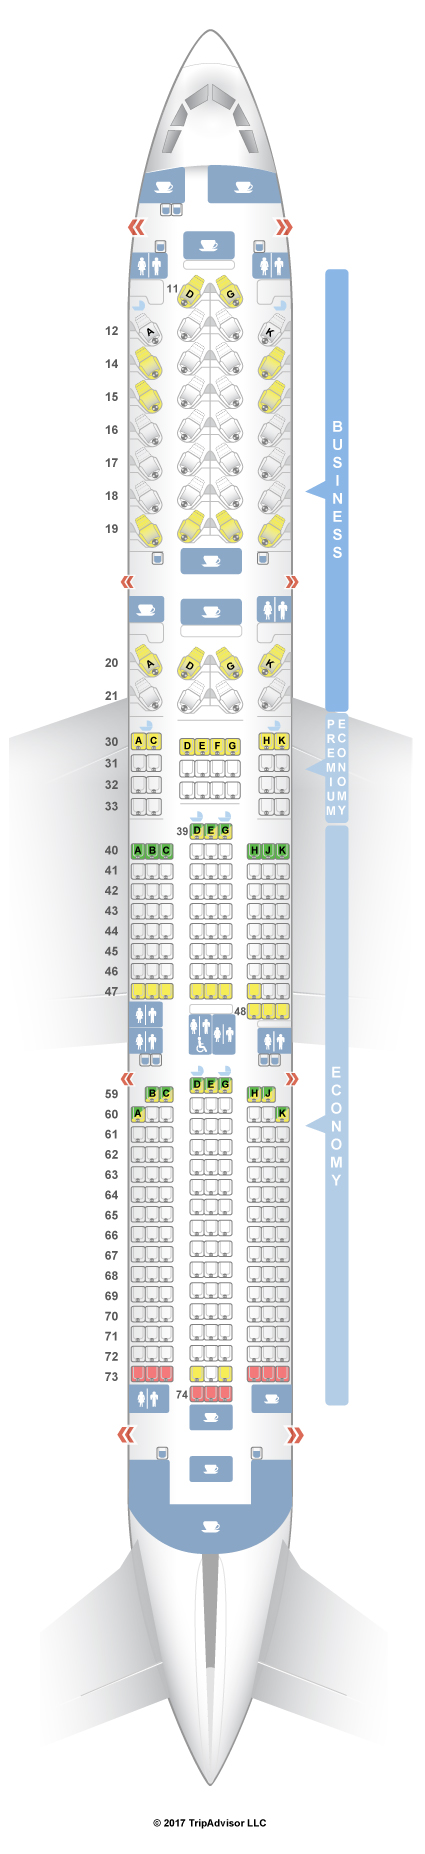 Cathay Pacific Flight Seating Chart